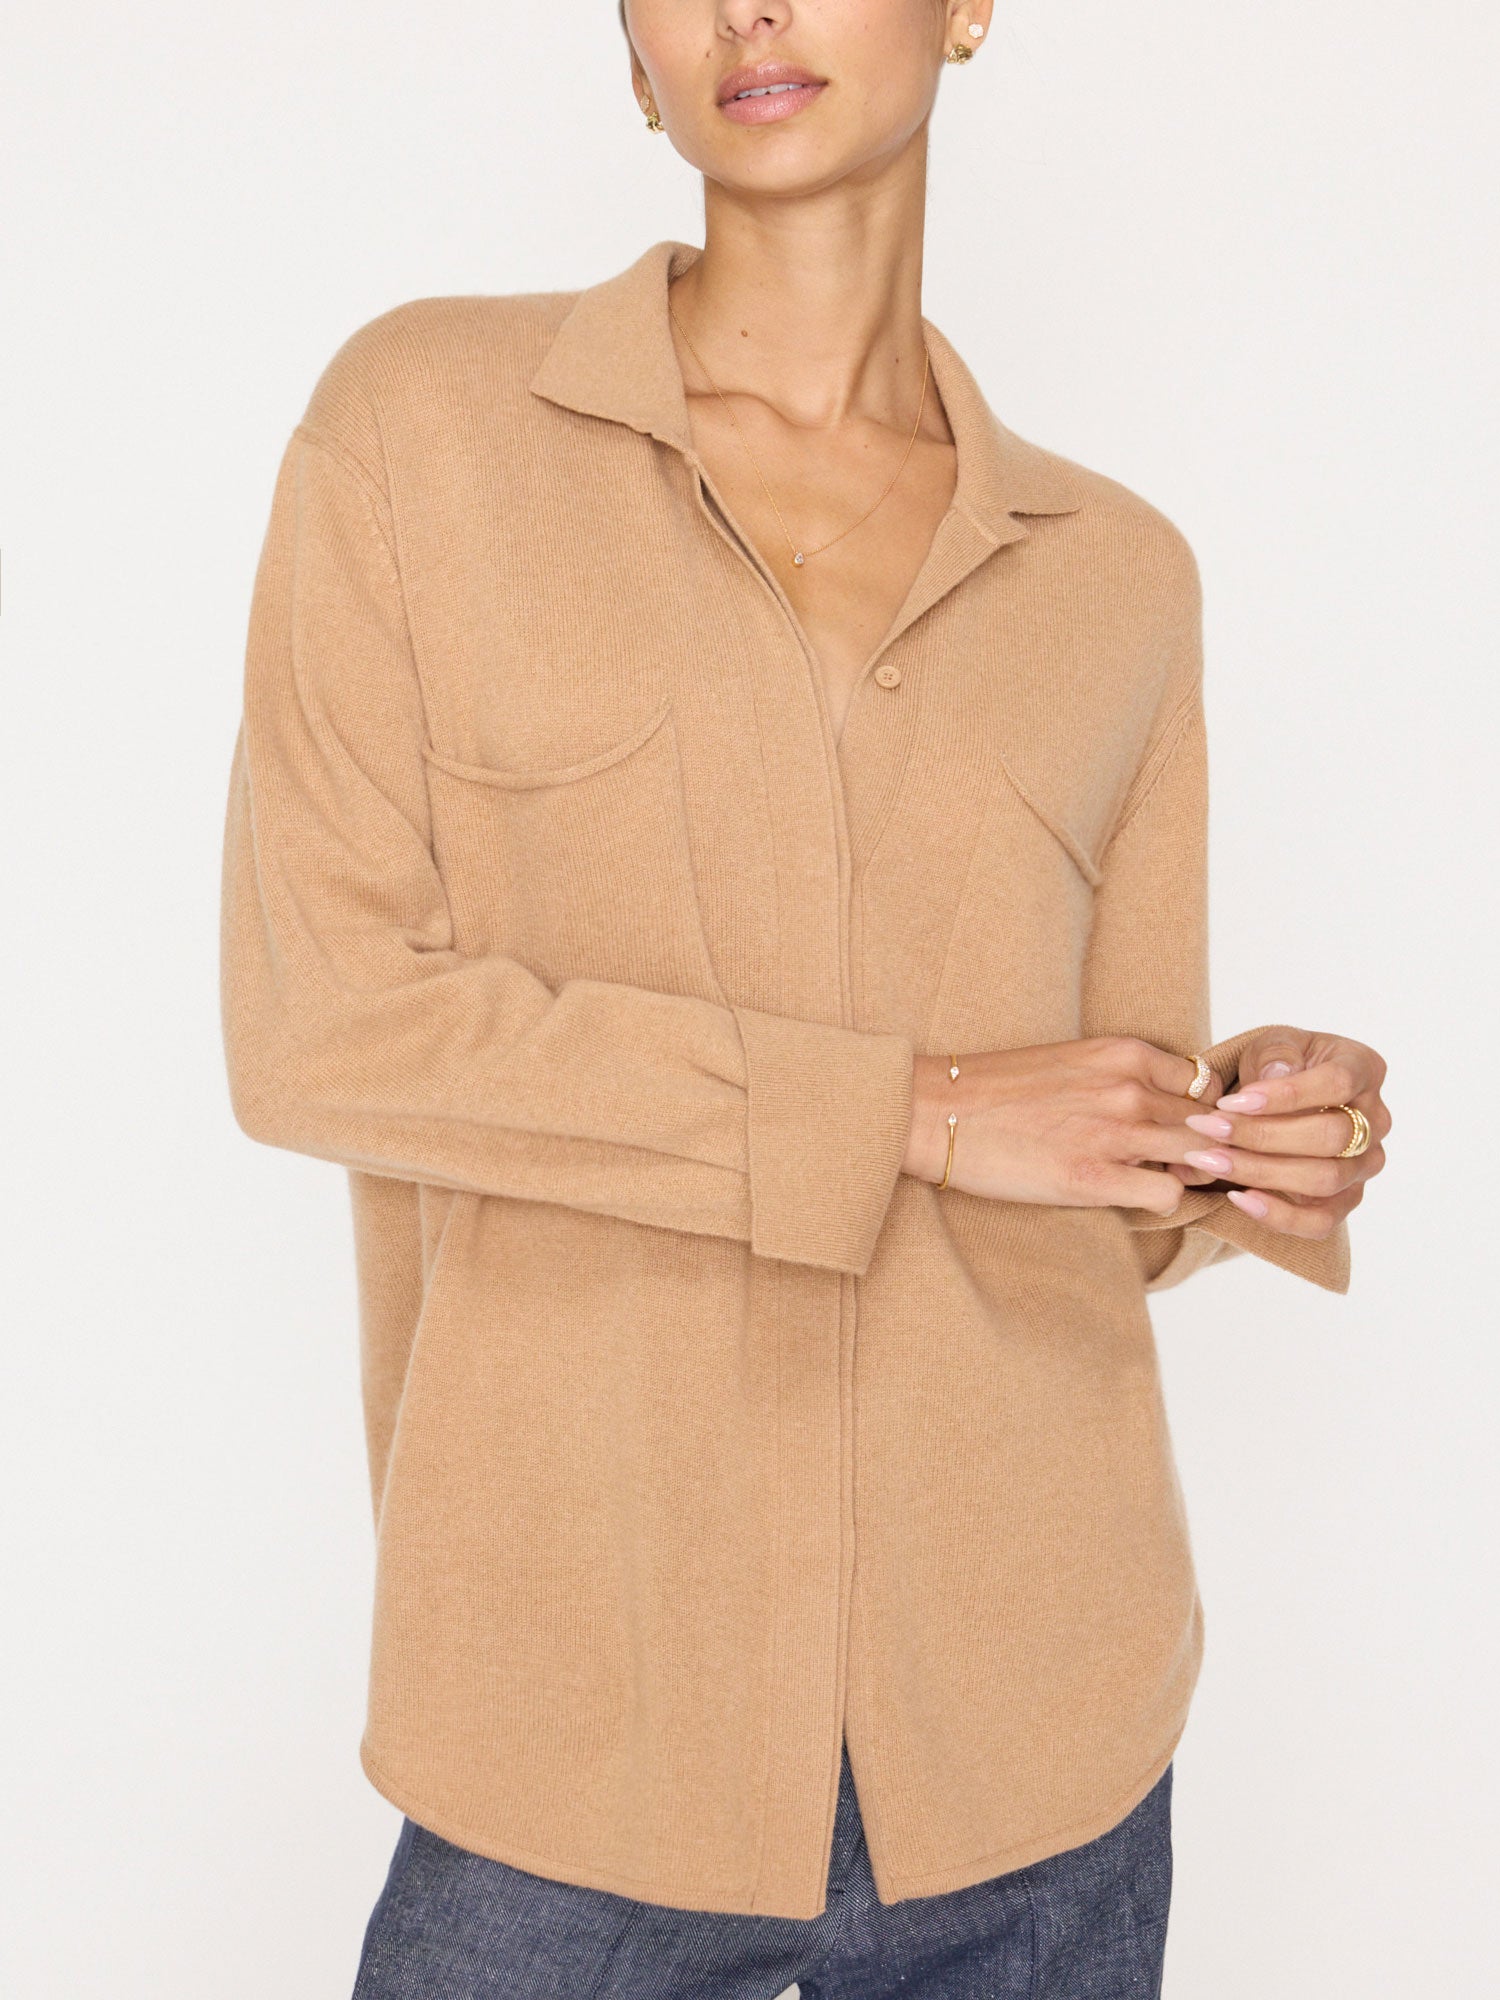 Andre cashmere buttondown camel shacket front view